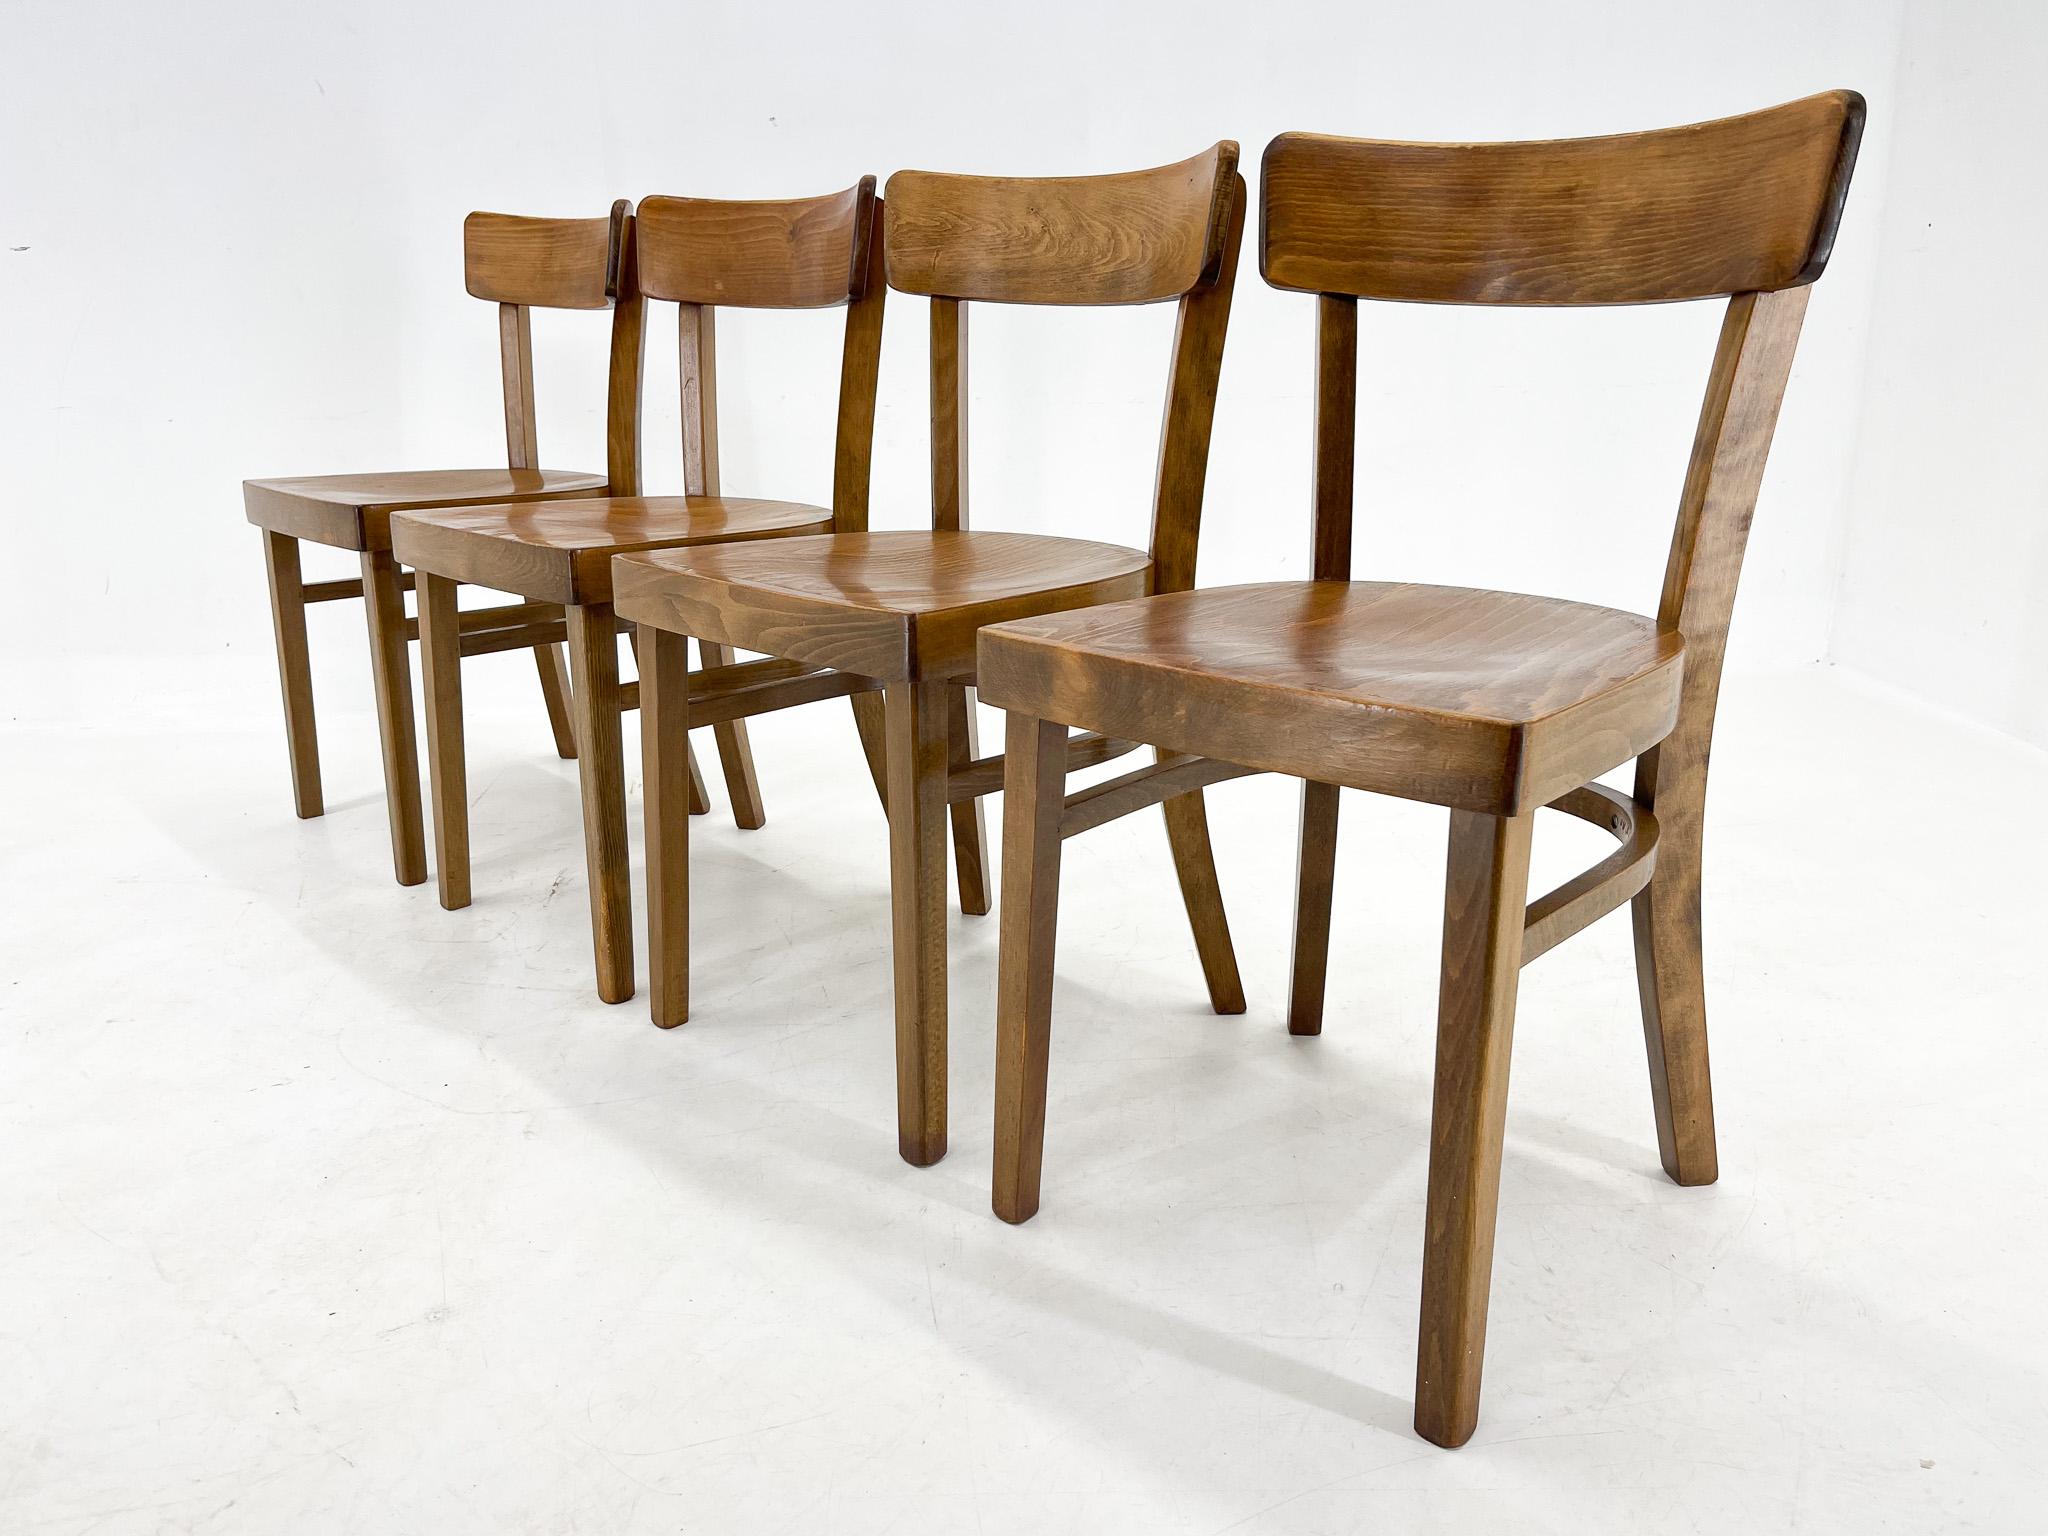 Set of Four Wooden Ton Chairs, Czechoslovakia, 1960s For Sale 9